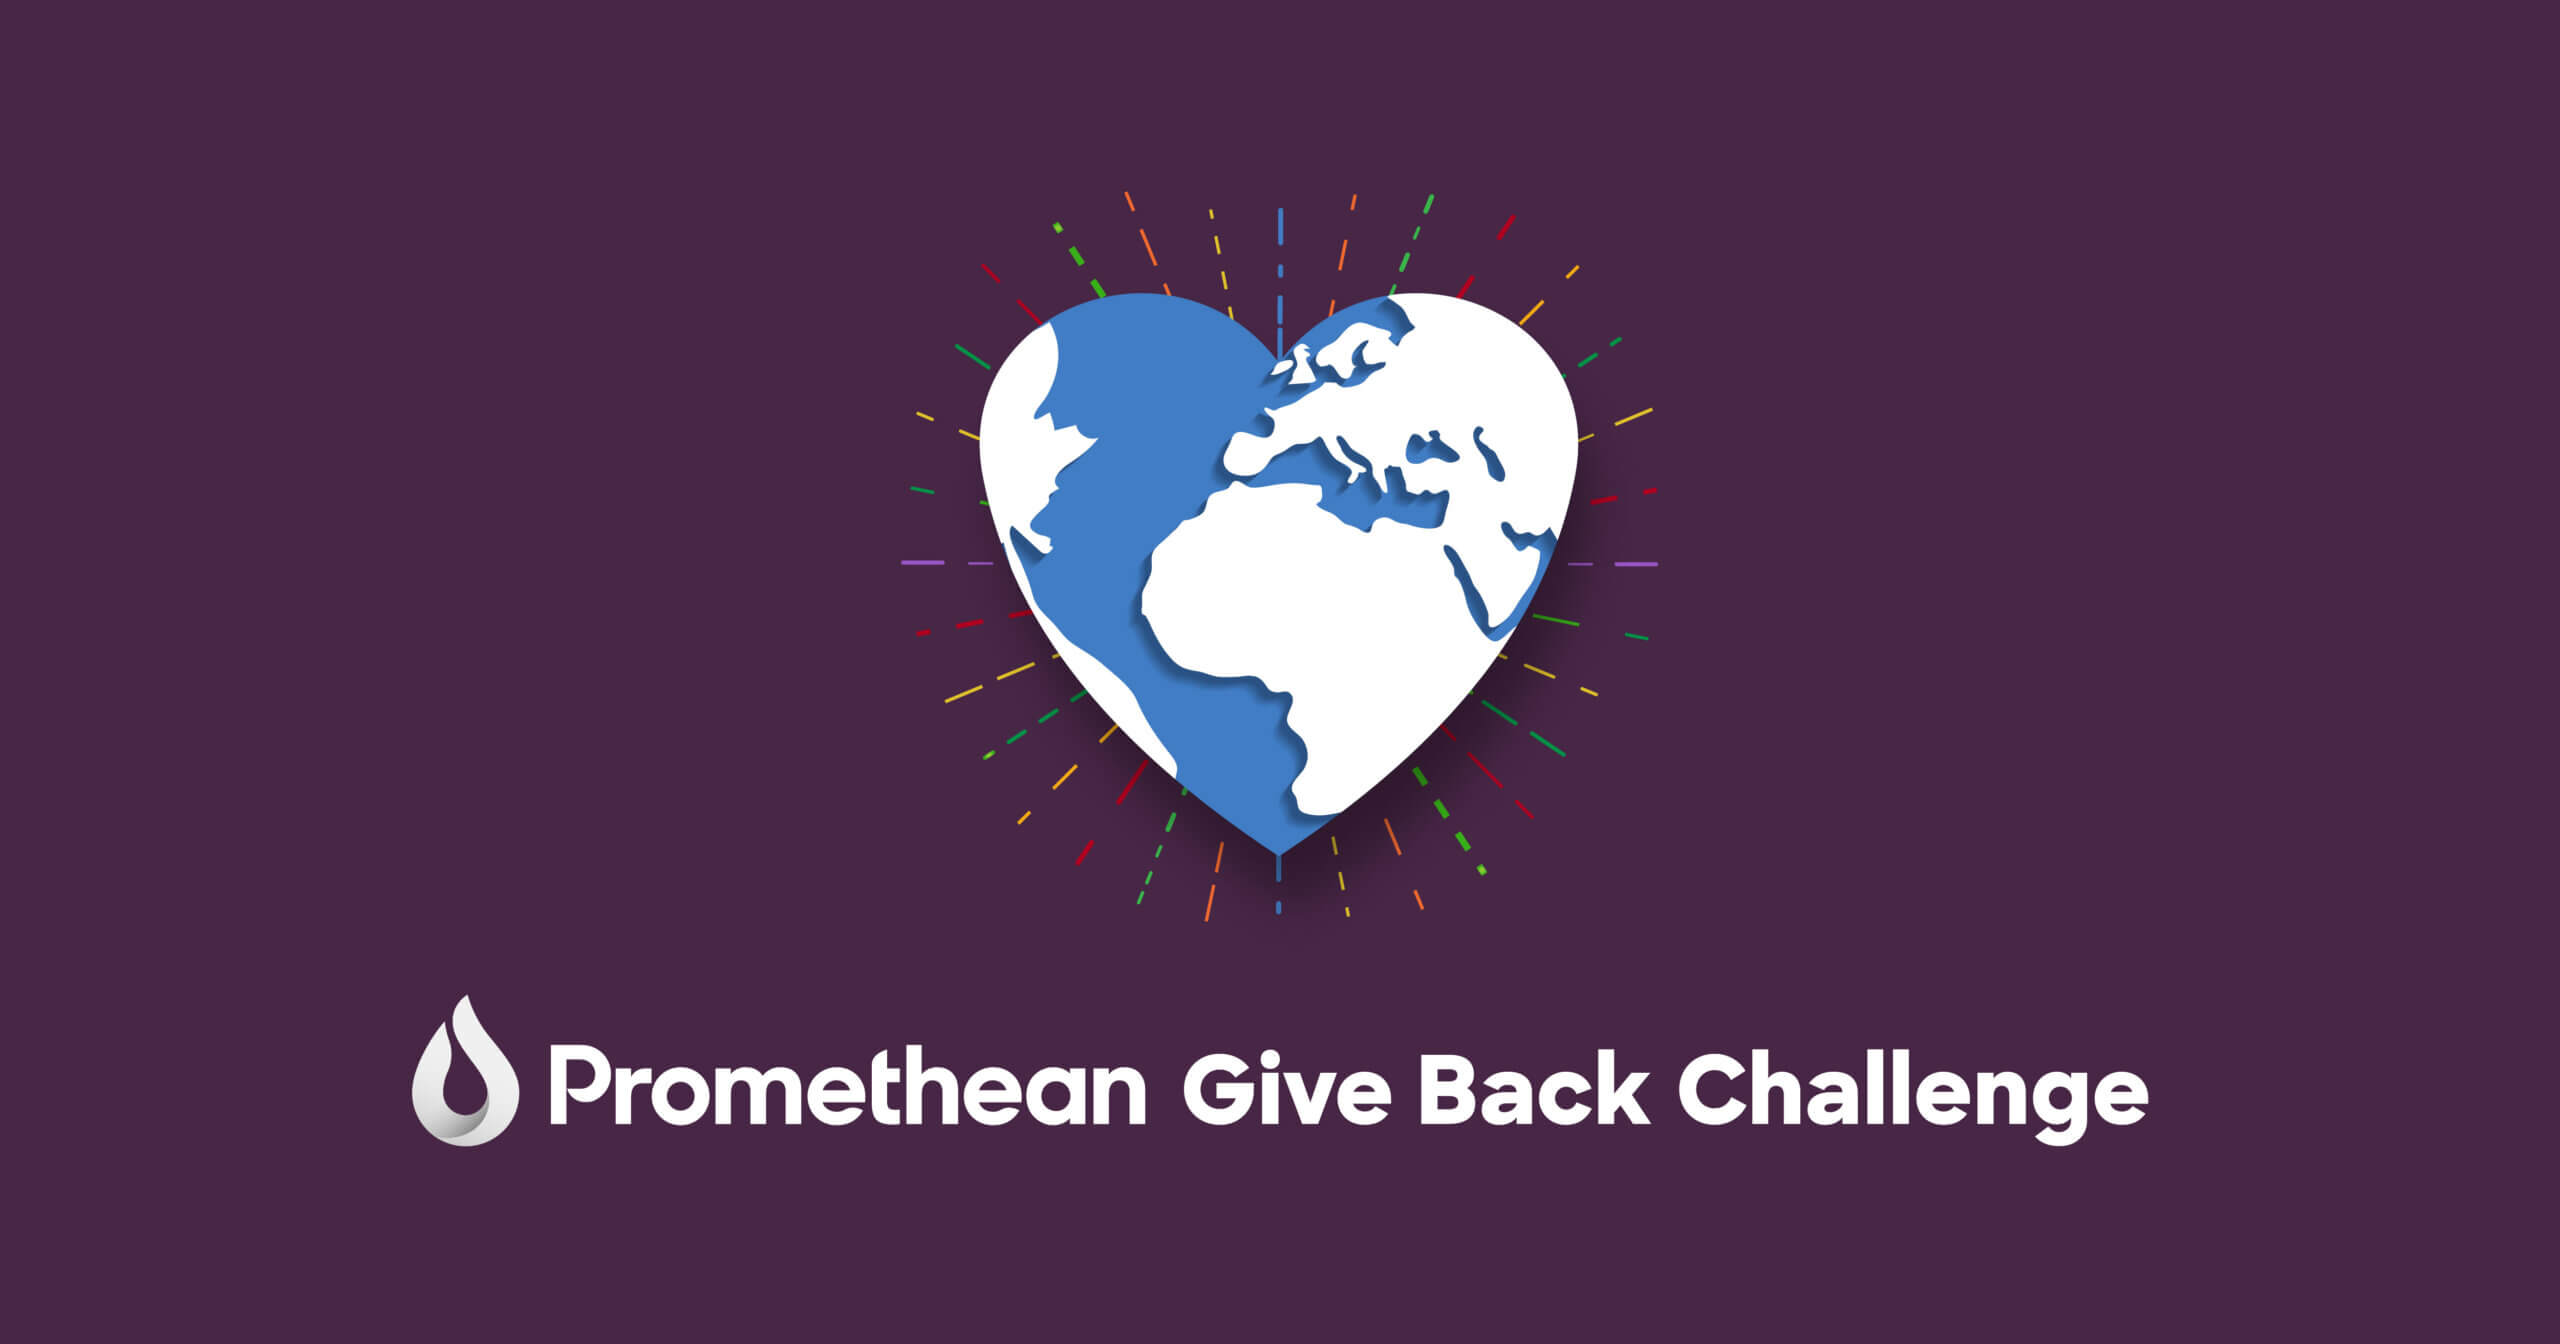 promethean gives back, corporate social responsibility